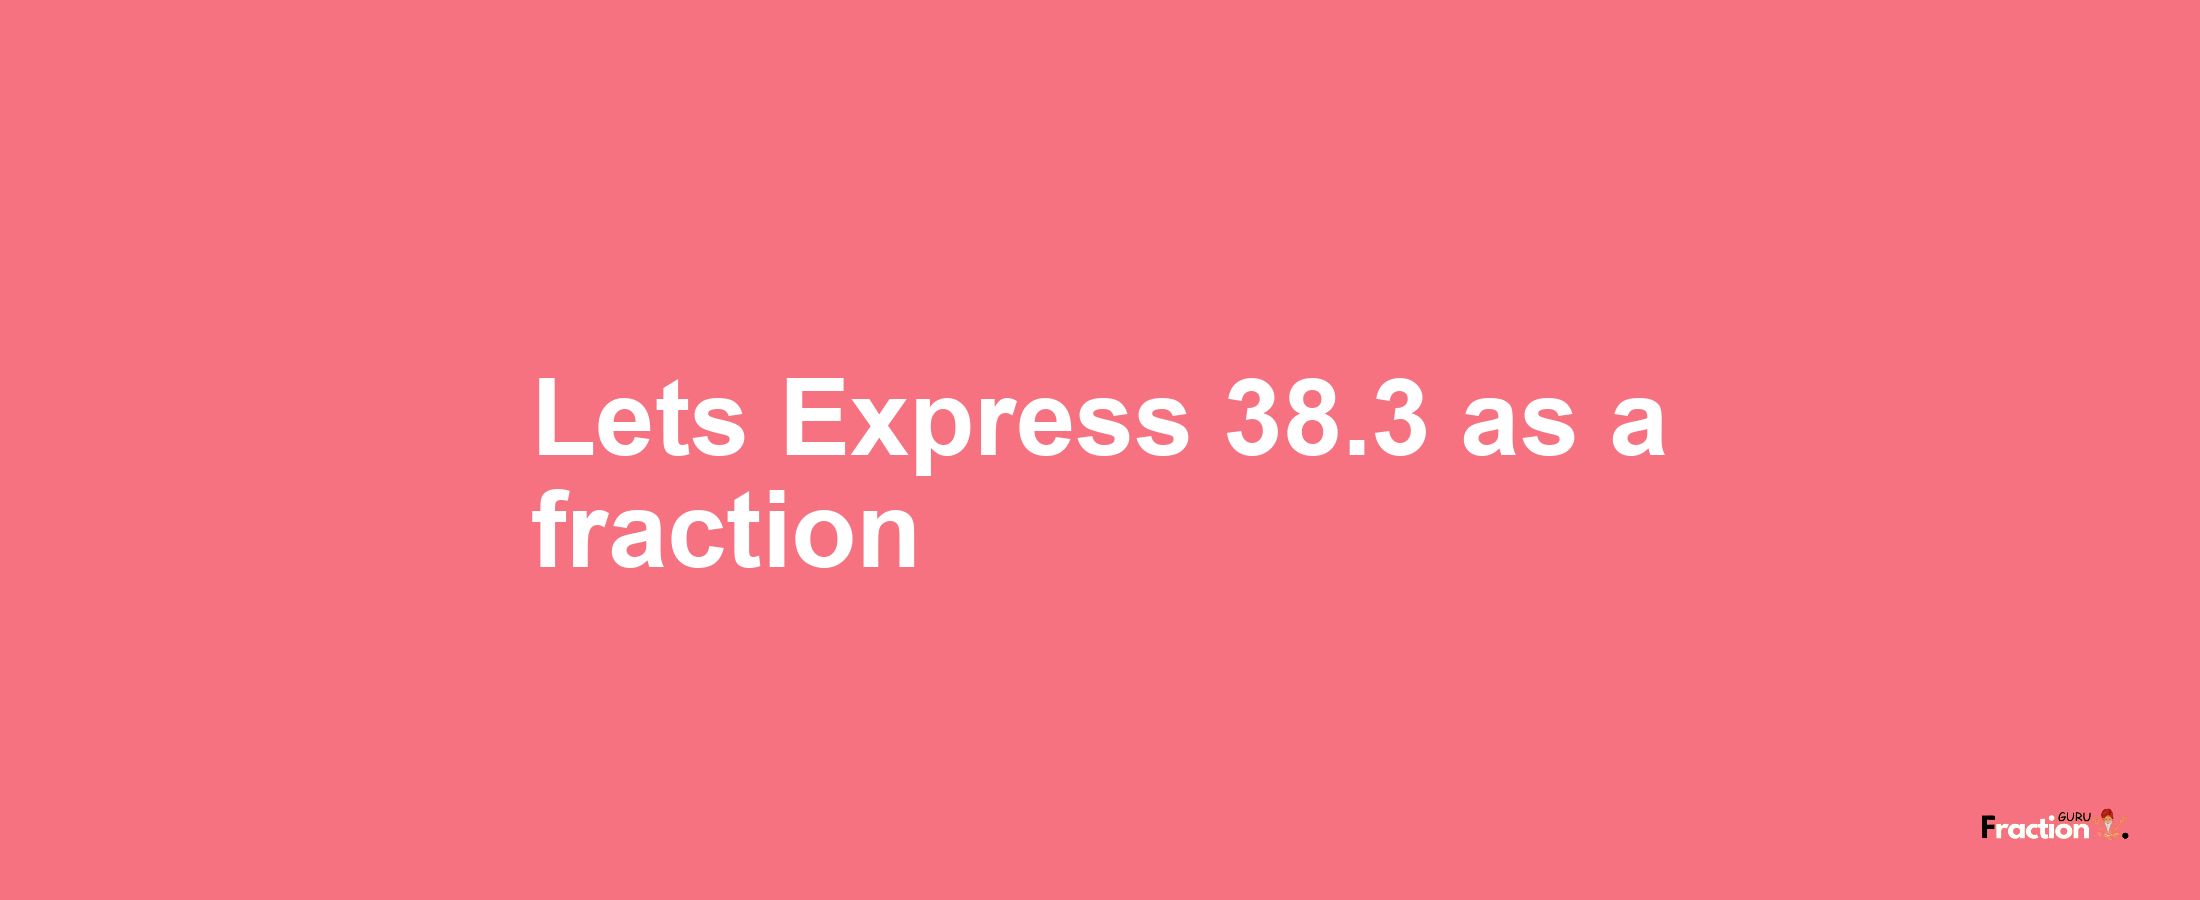 Lets Express 38.3 as afraction